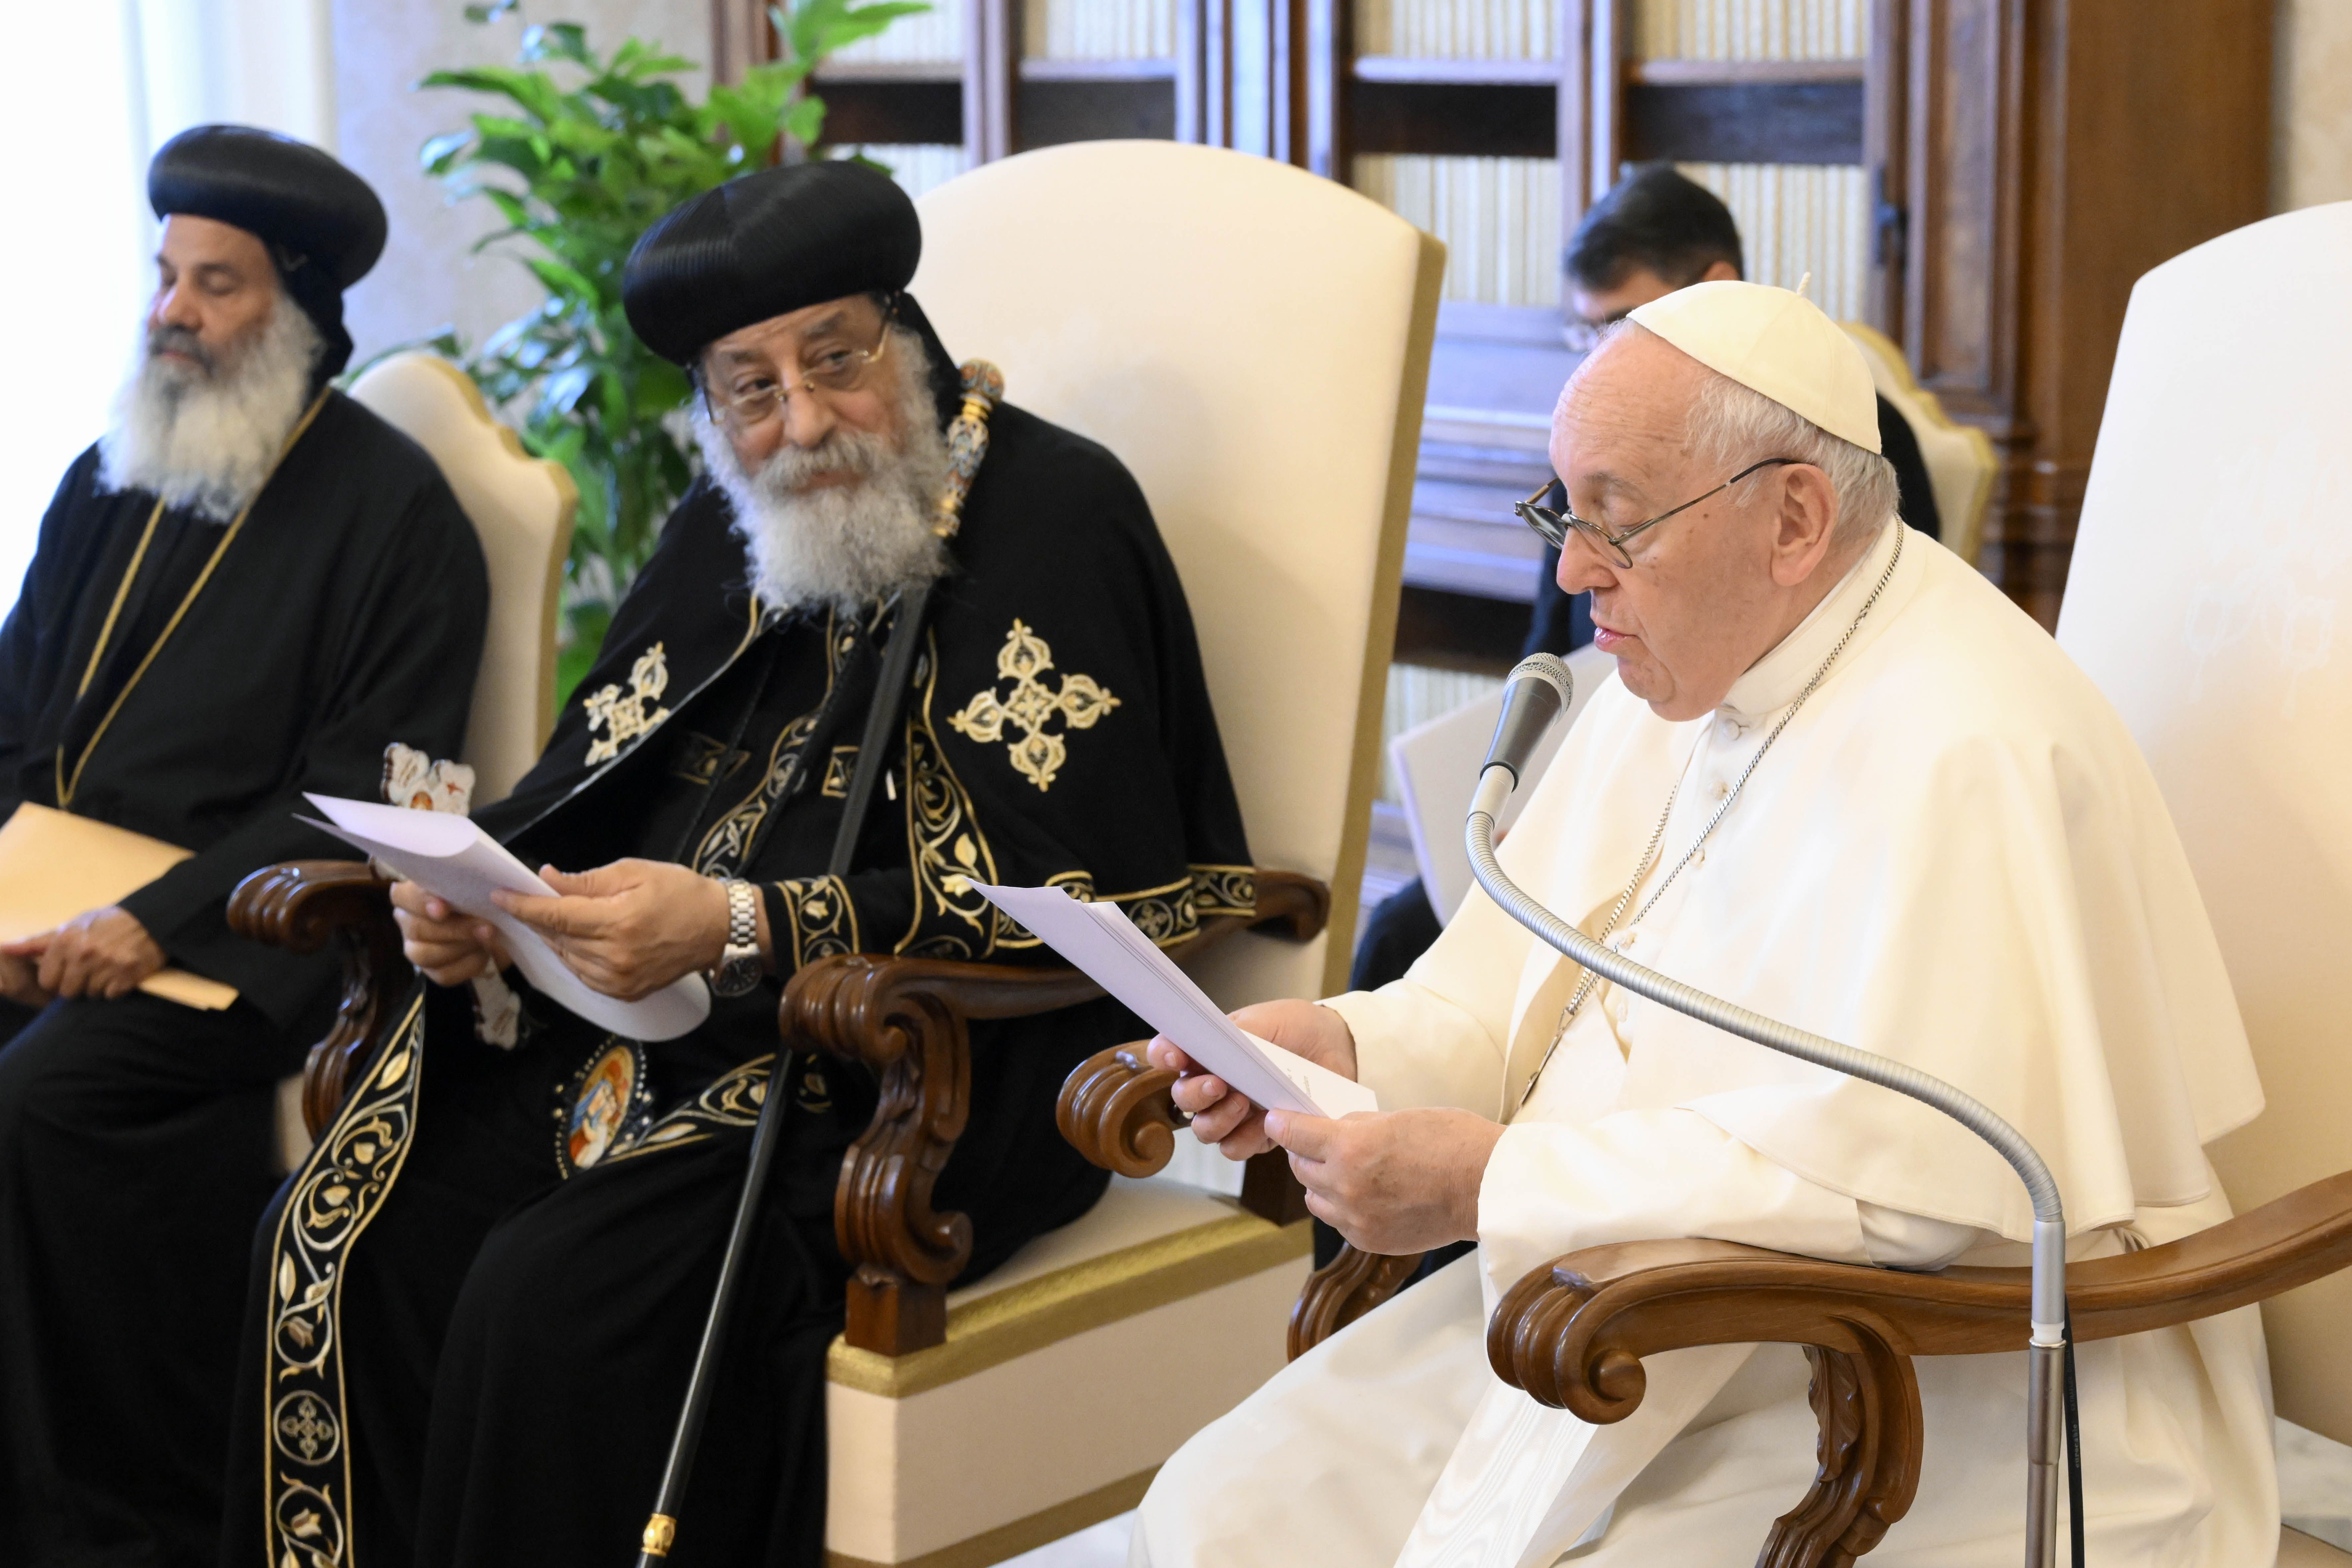 Coptic Orthodox Church confirms dialogue with Catholic Church suspended over same-sex blessings